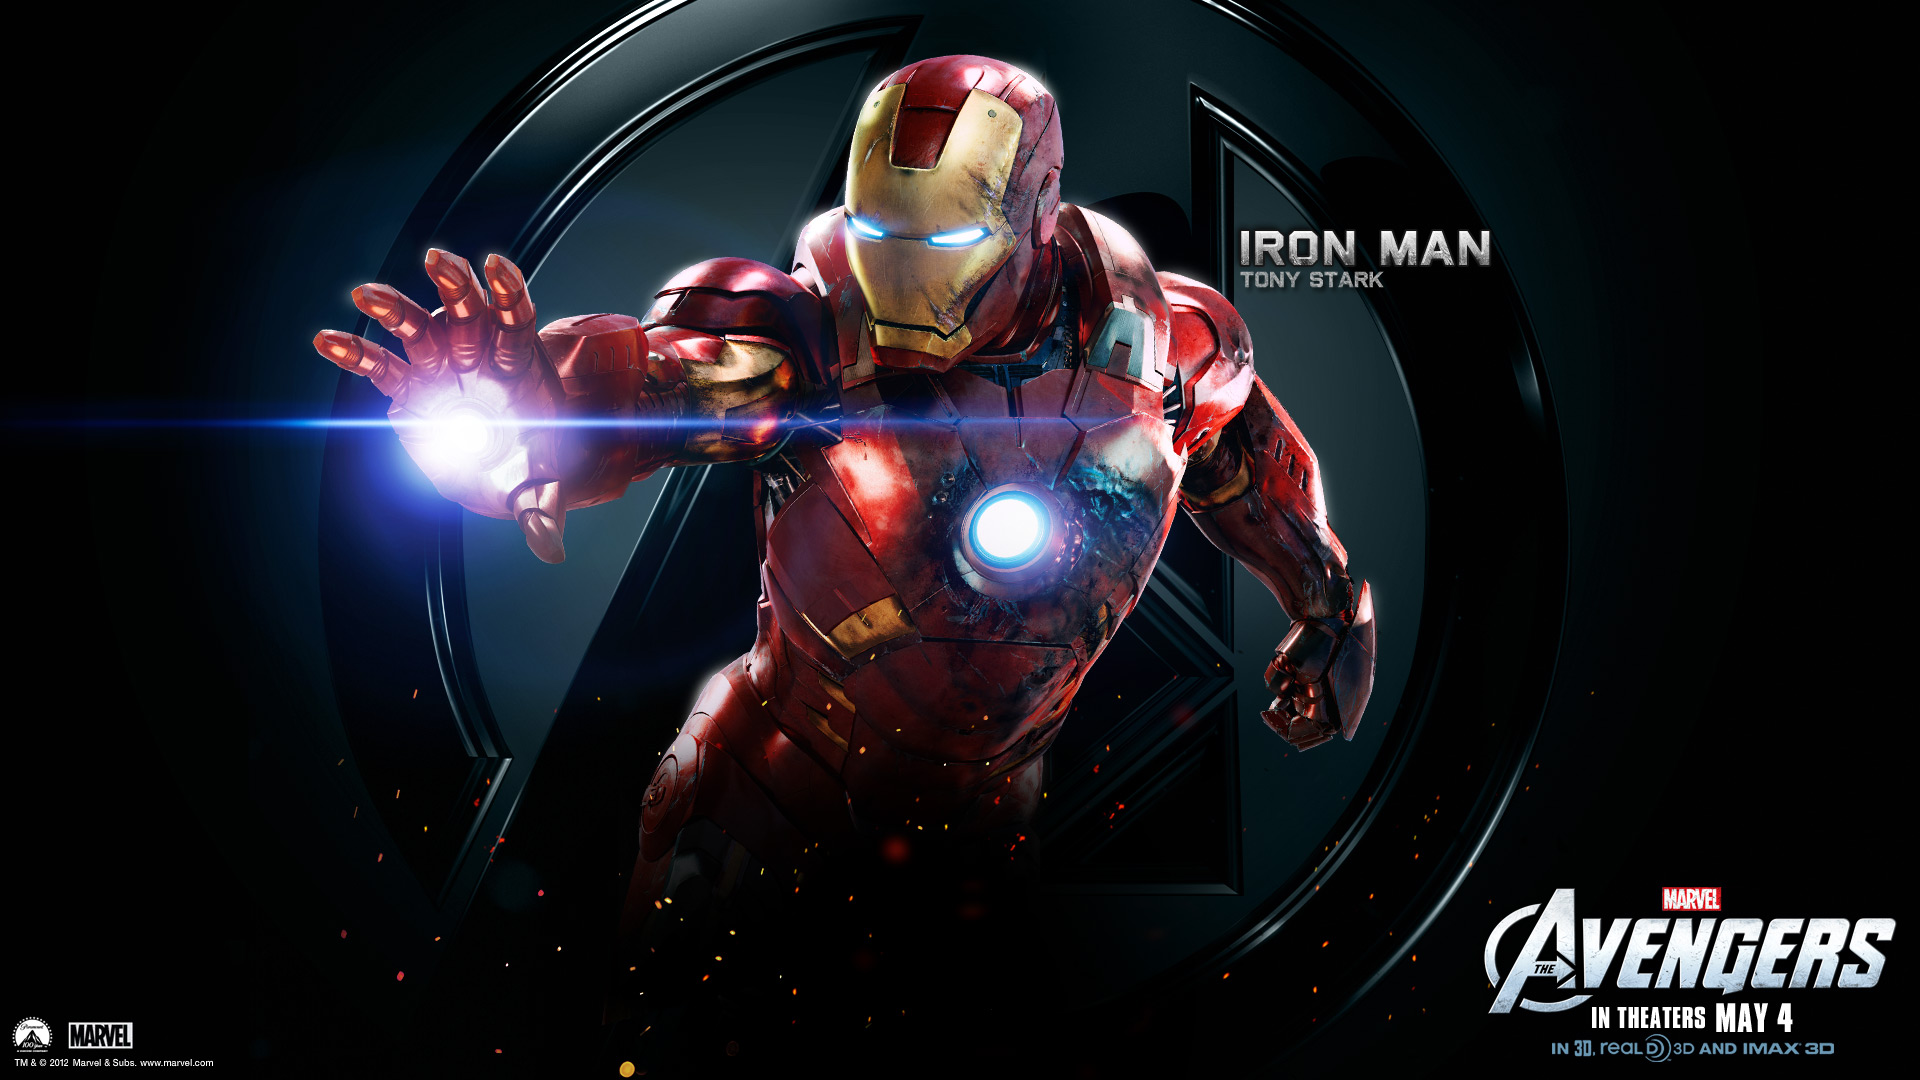 Marvels Avengers Wallpapers HD The Avengers Iron Man HD 1920x1080